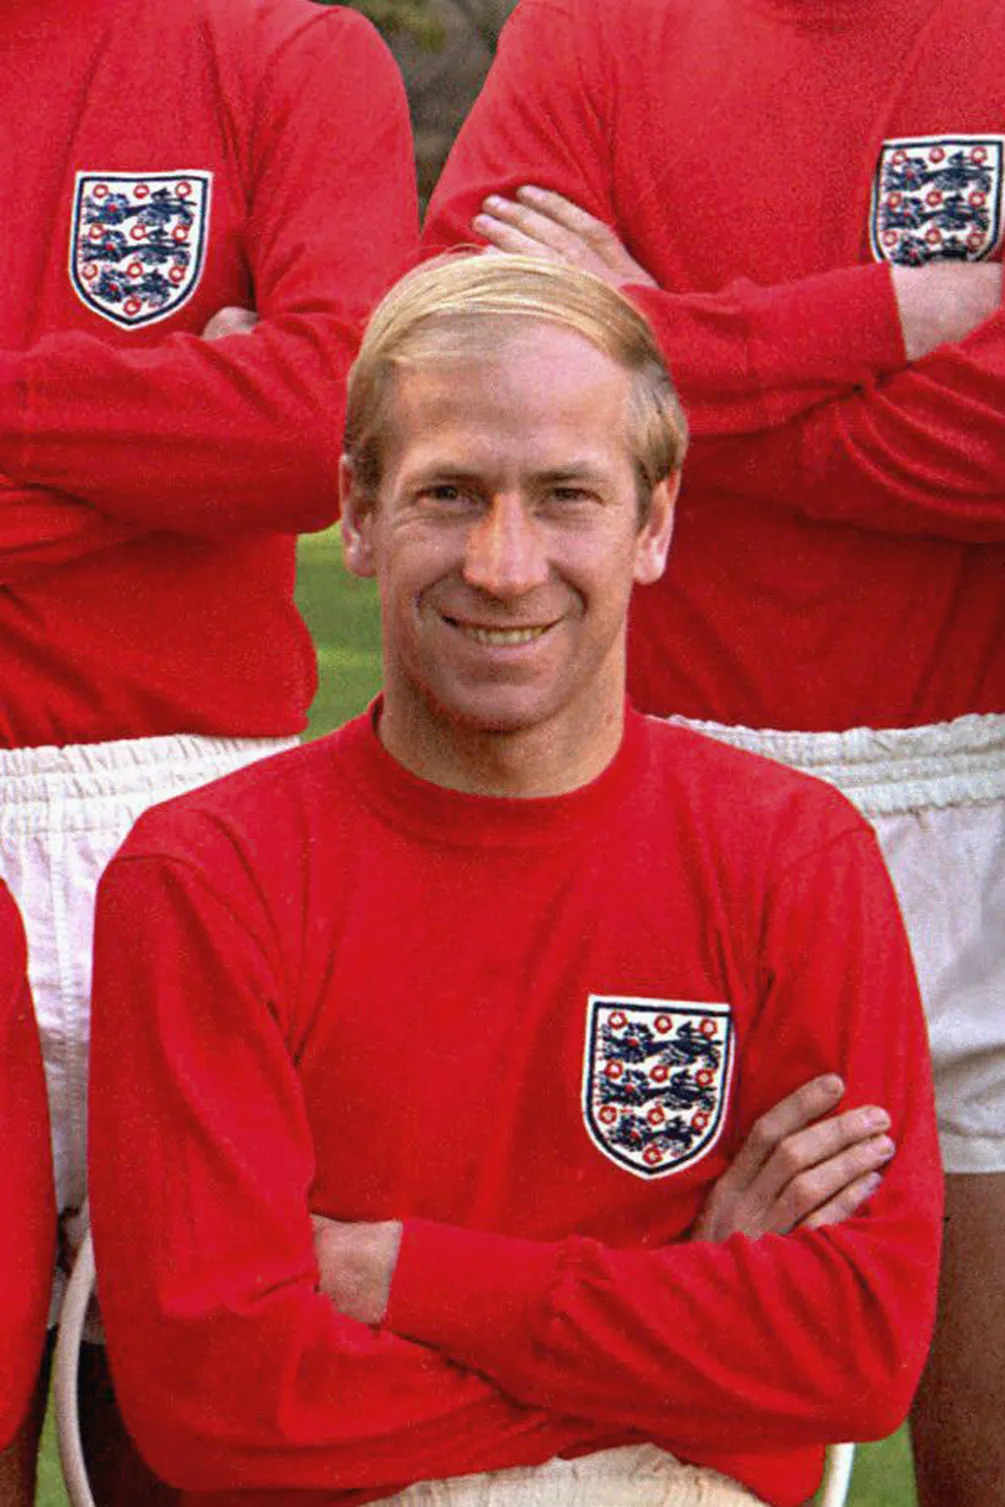 Legendary footballer, Sir Bobby Charlton d!es aged 86 after battle with dementia